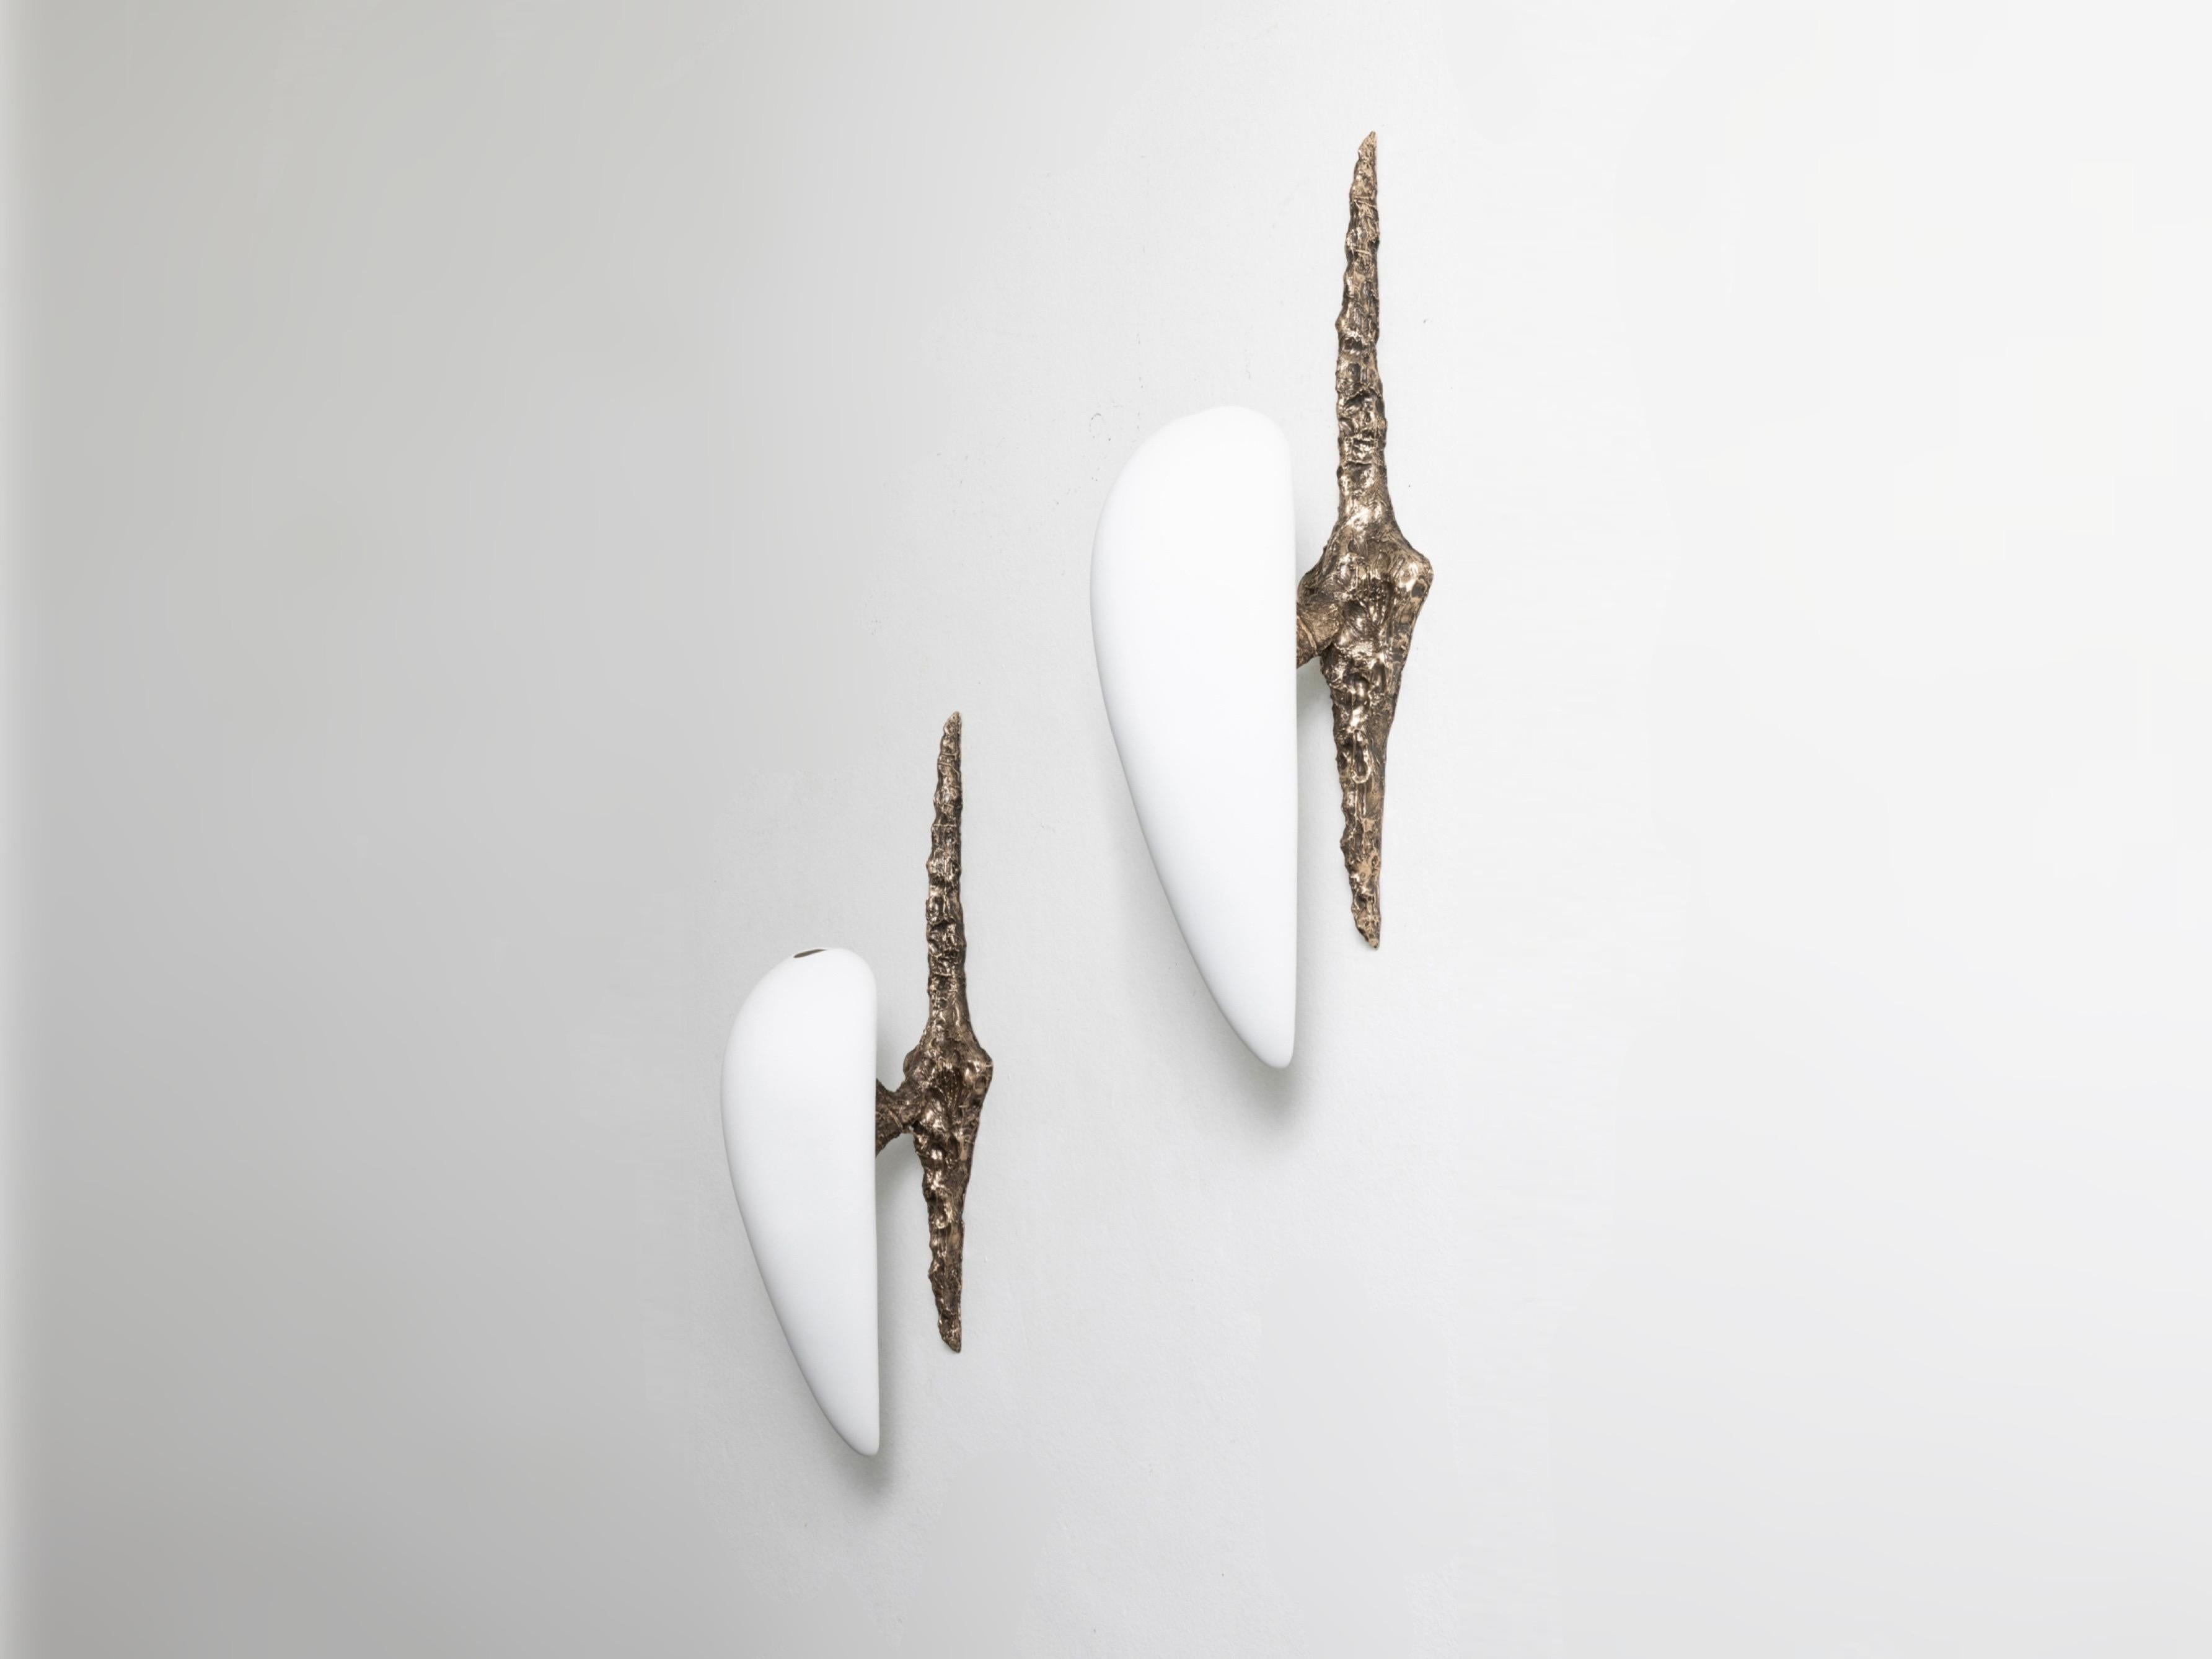 Sconces by William Guillon
Material: Patinated and polish bronze, porcelain shade 
Dimensions: H 80 x 45 cm
Year: 2023

Resulting from bronze and porcelain, each piece is unique and hand-sculpted from scratch in wax before being cast. We offer a new